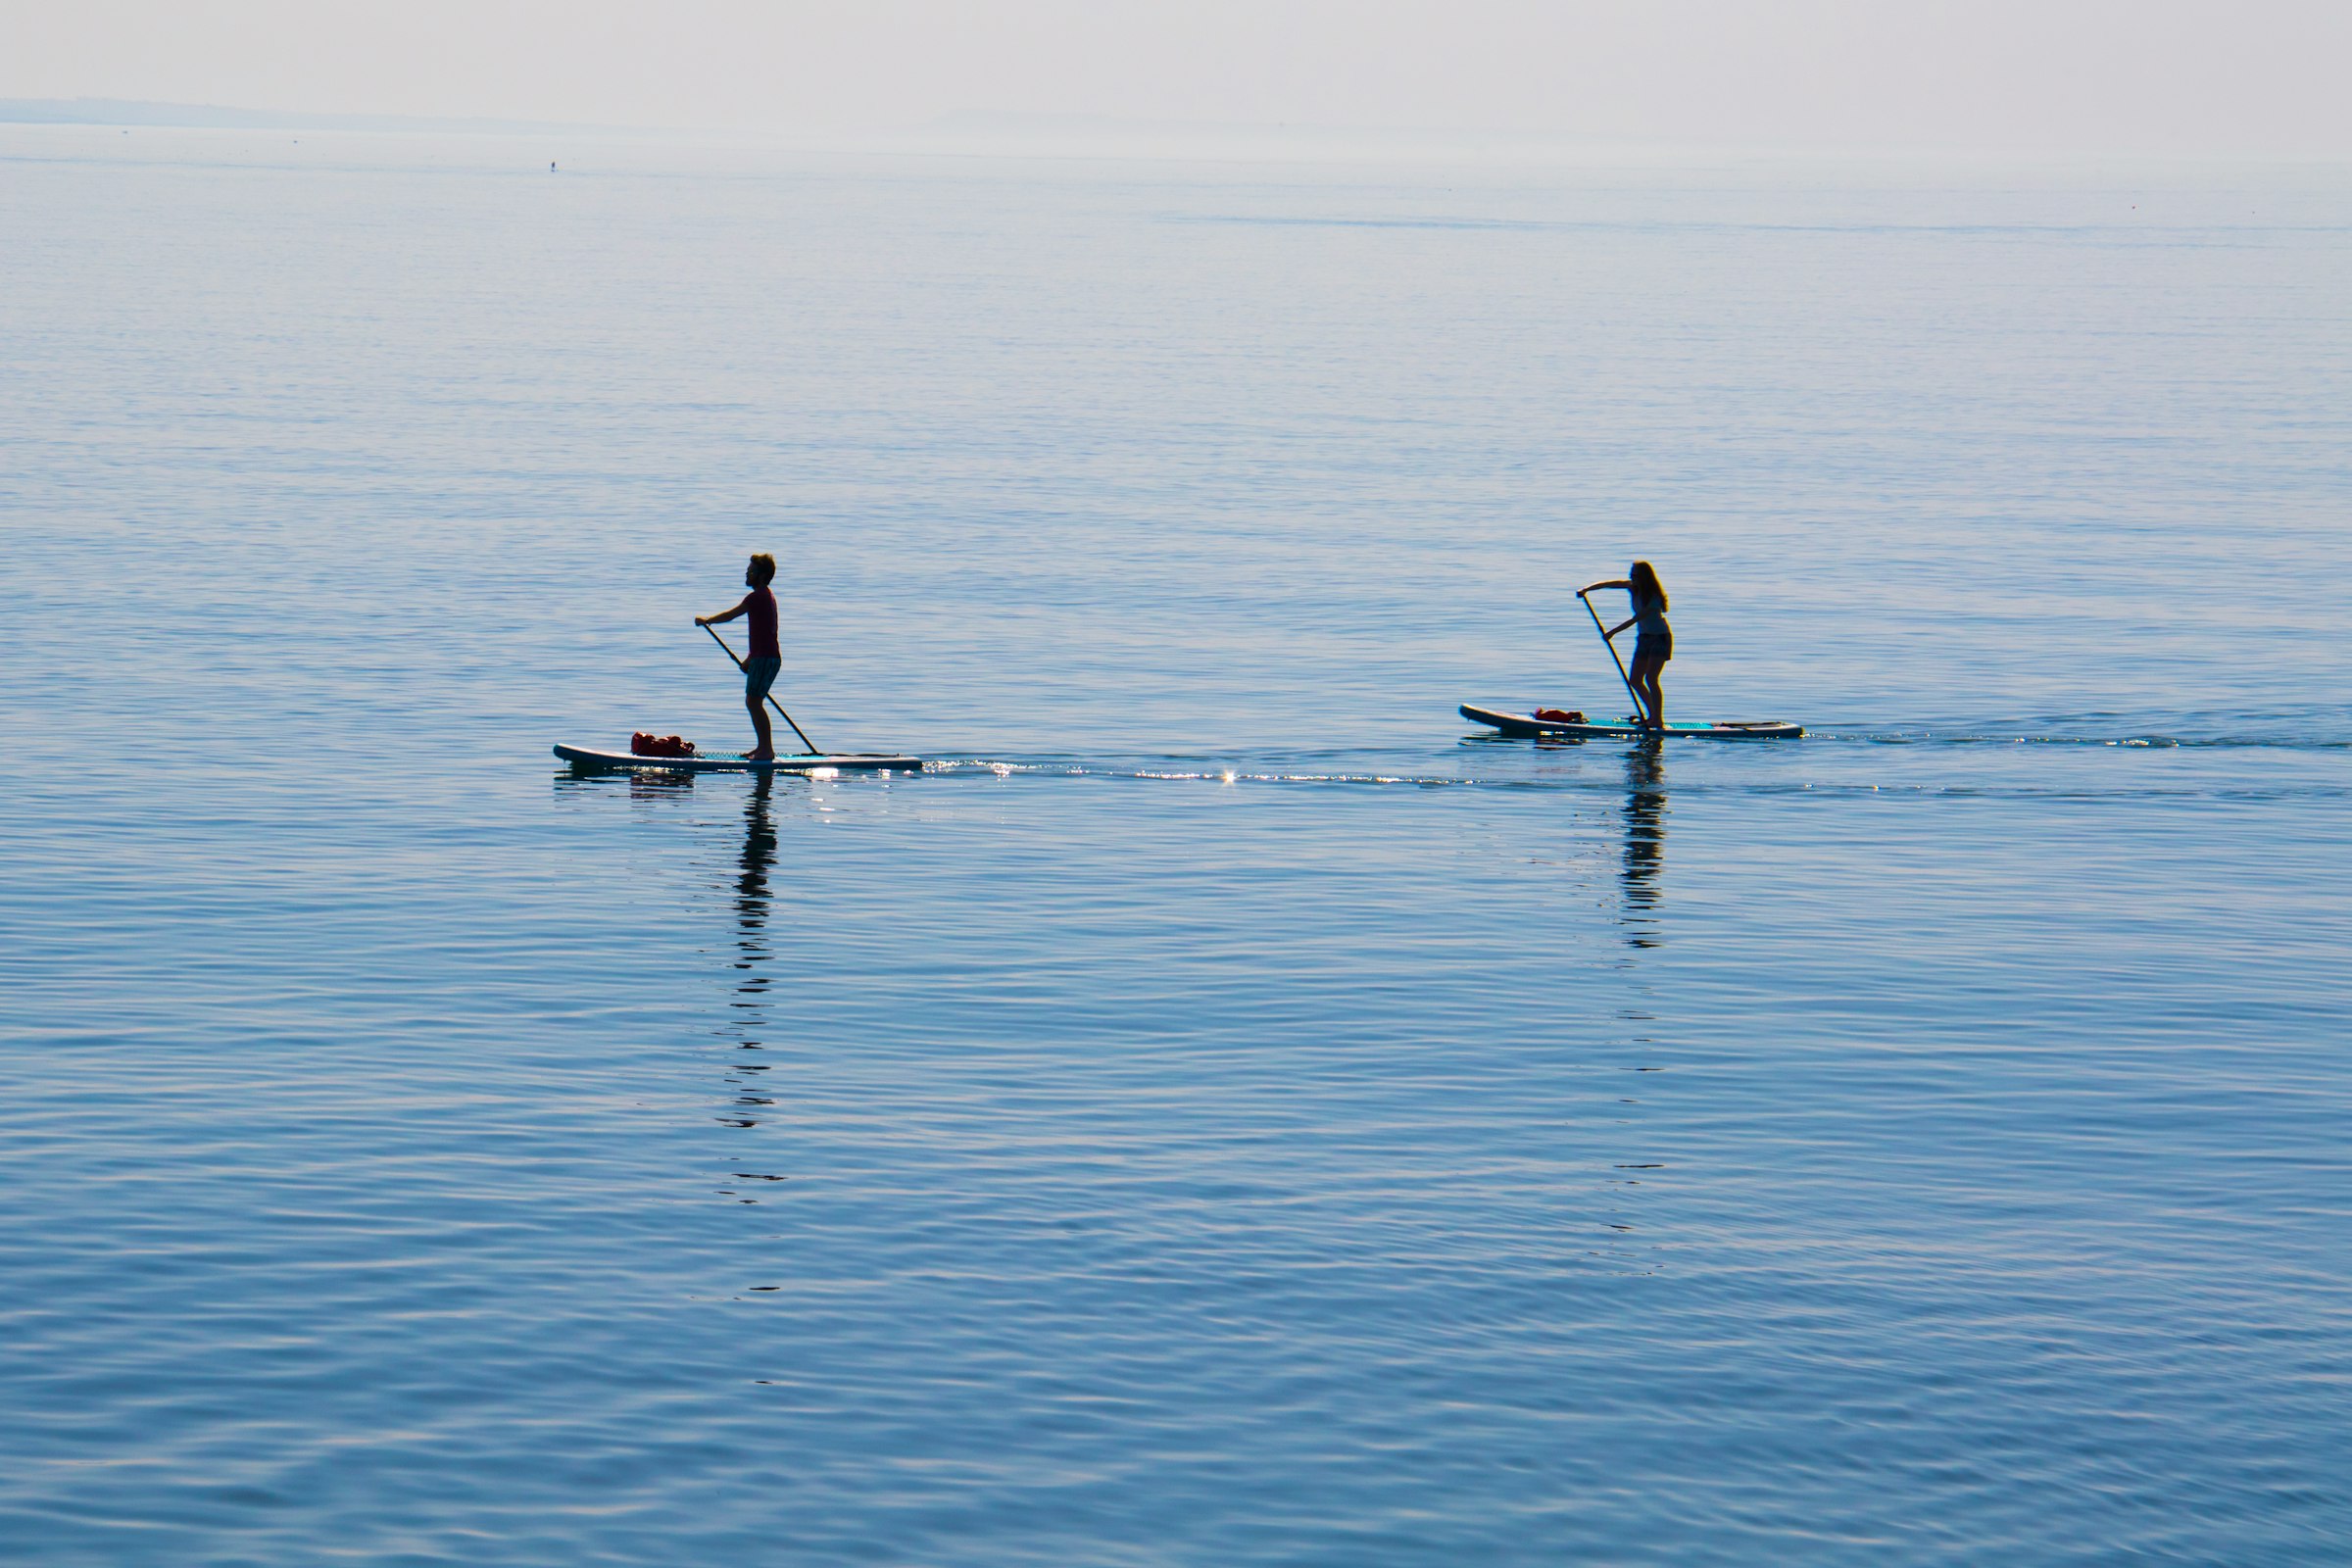 people ridding paddleboard on body of water